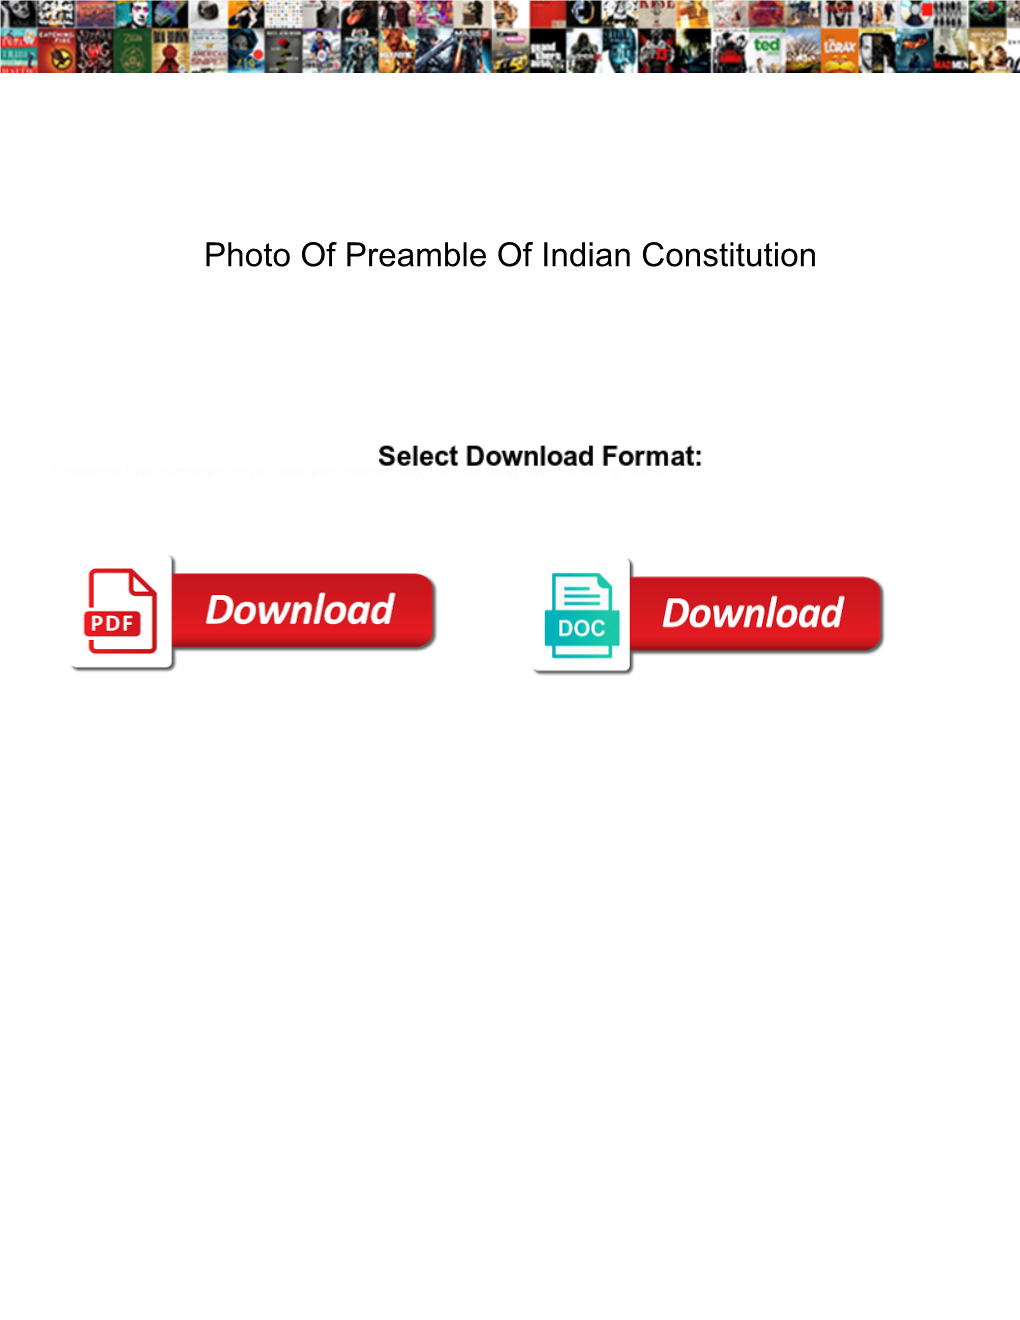 Photo of Preamble of Indian Constitution